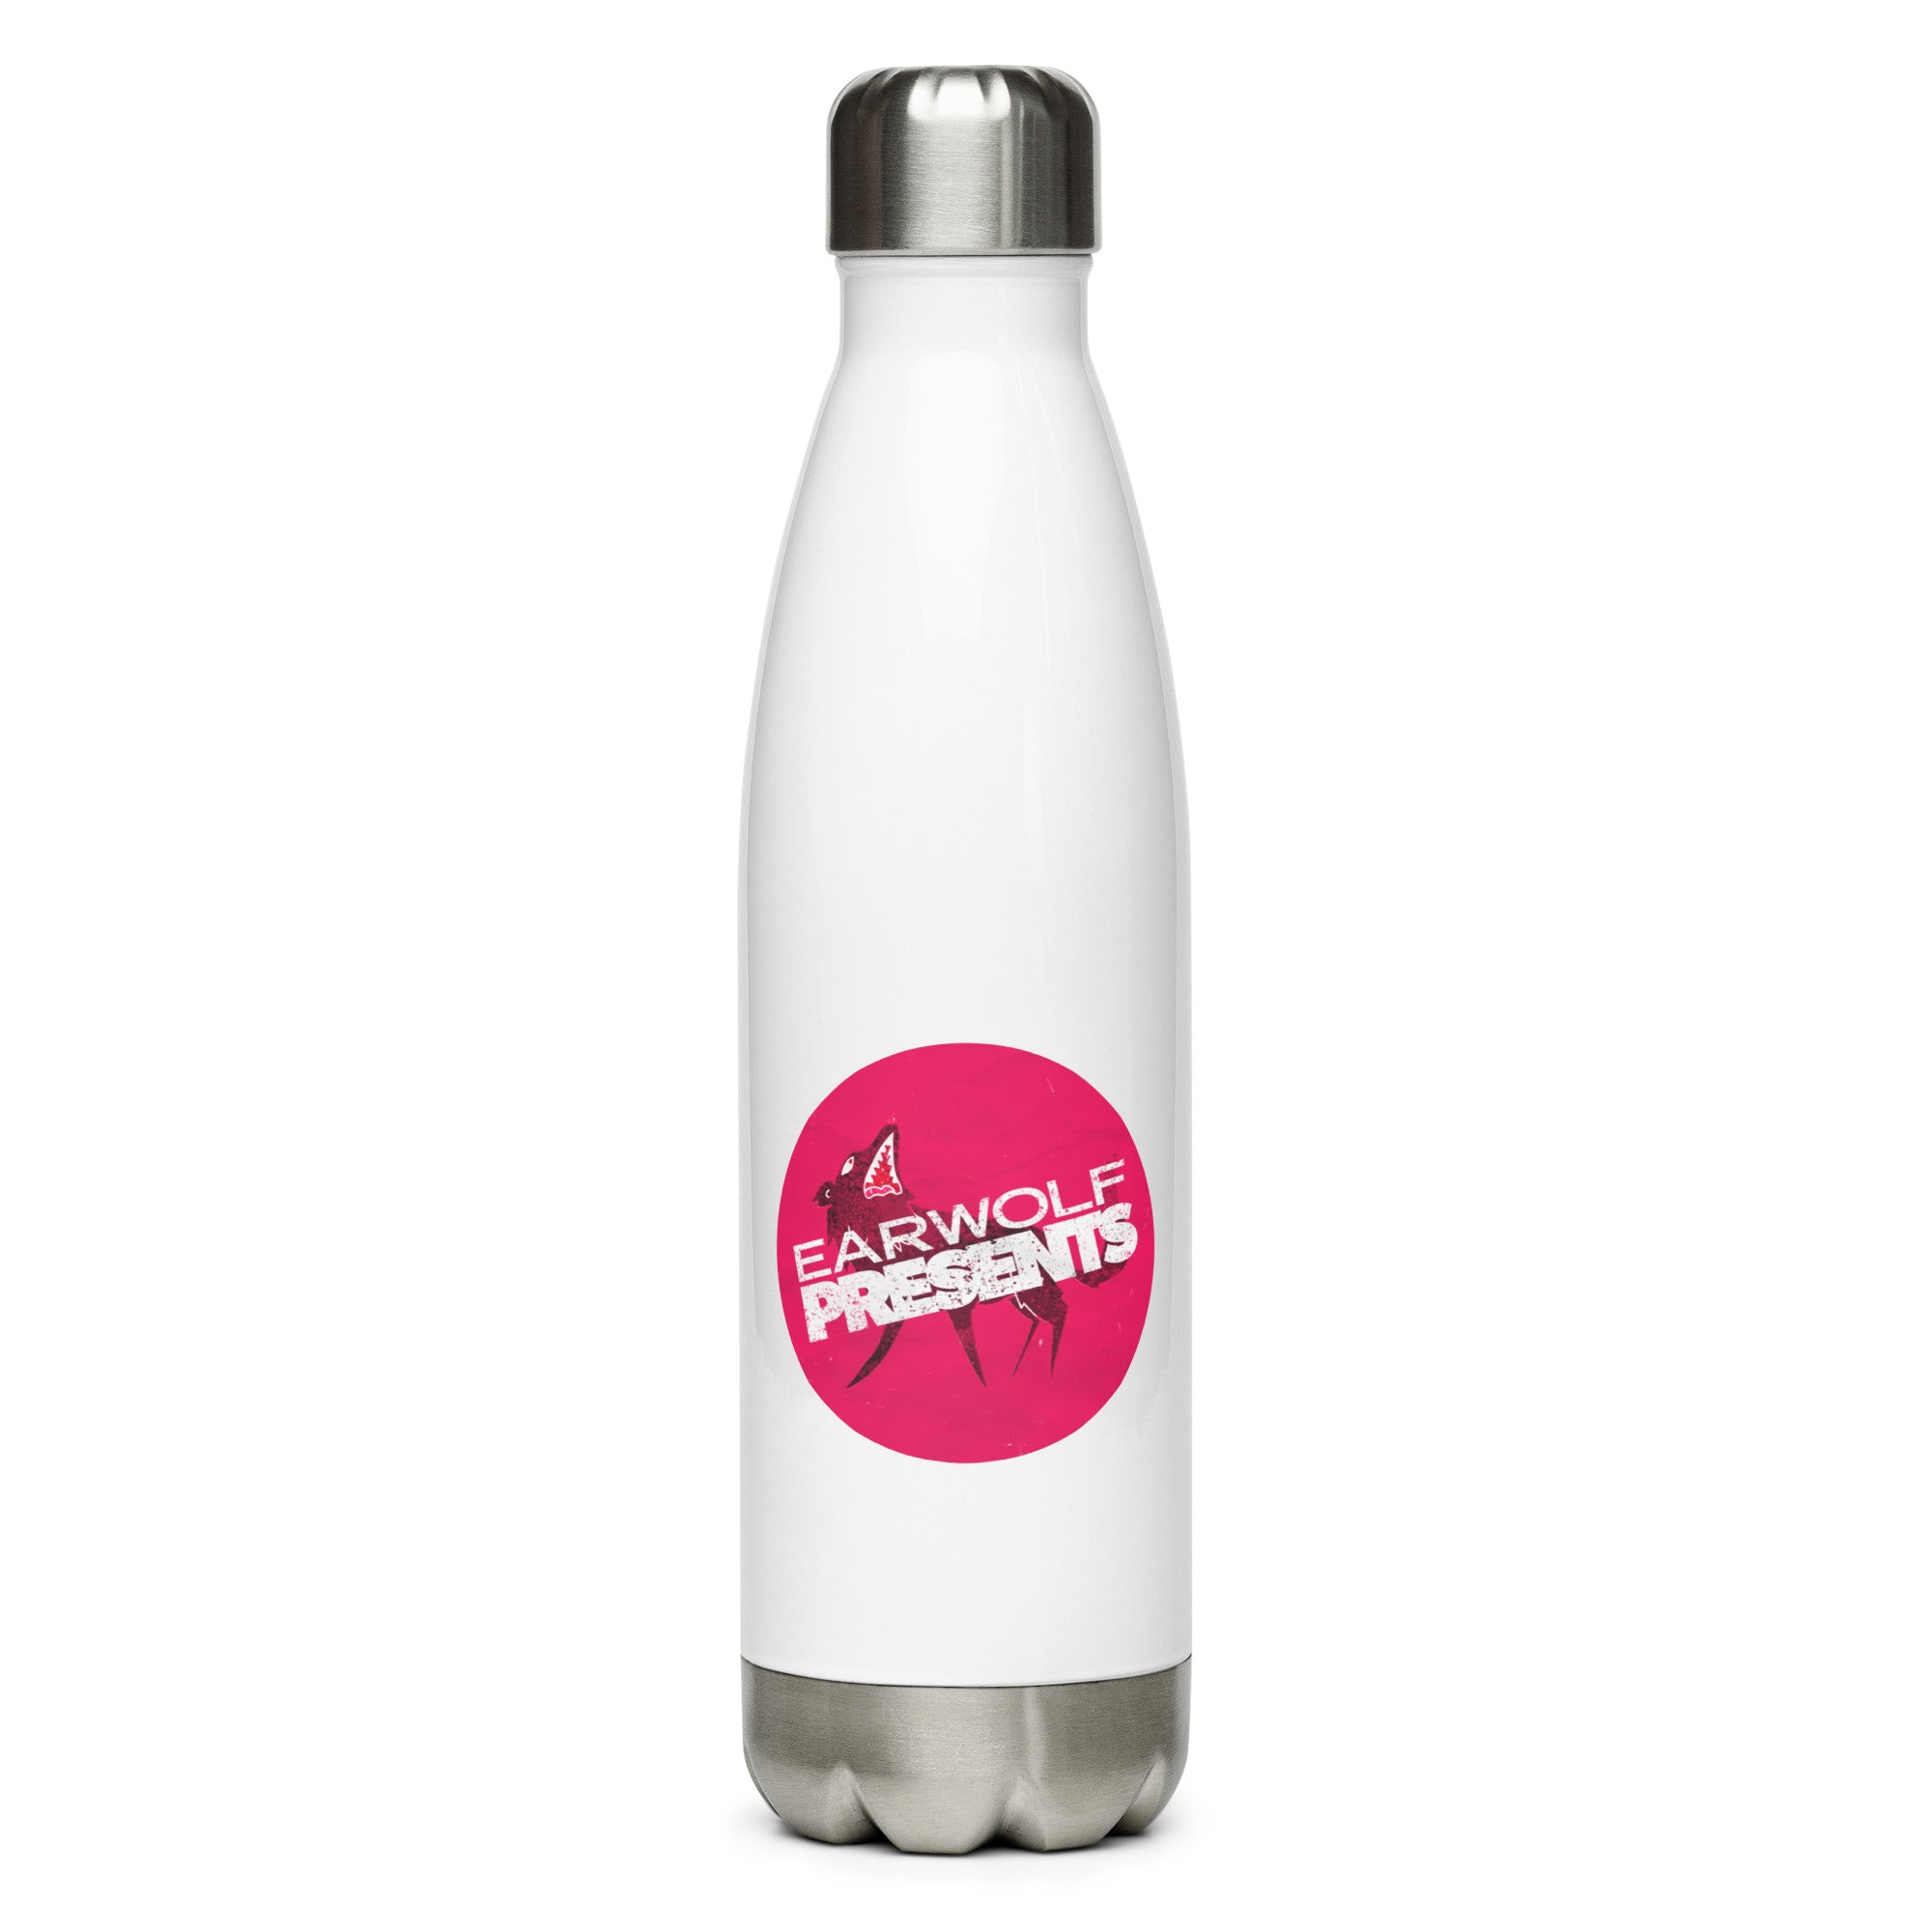 Earwolf Presents: Stainless Bottle